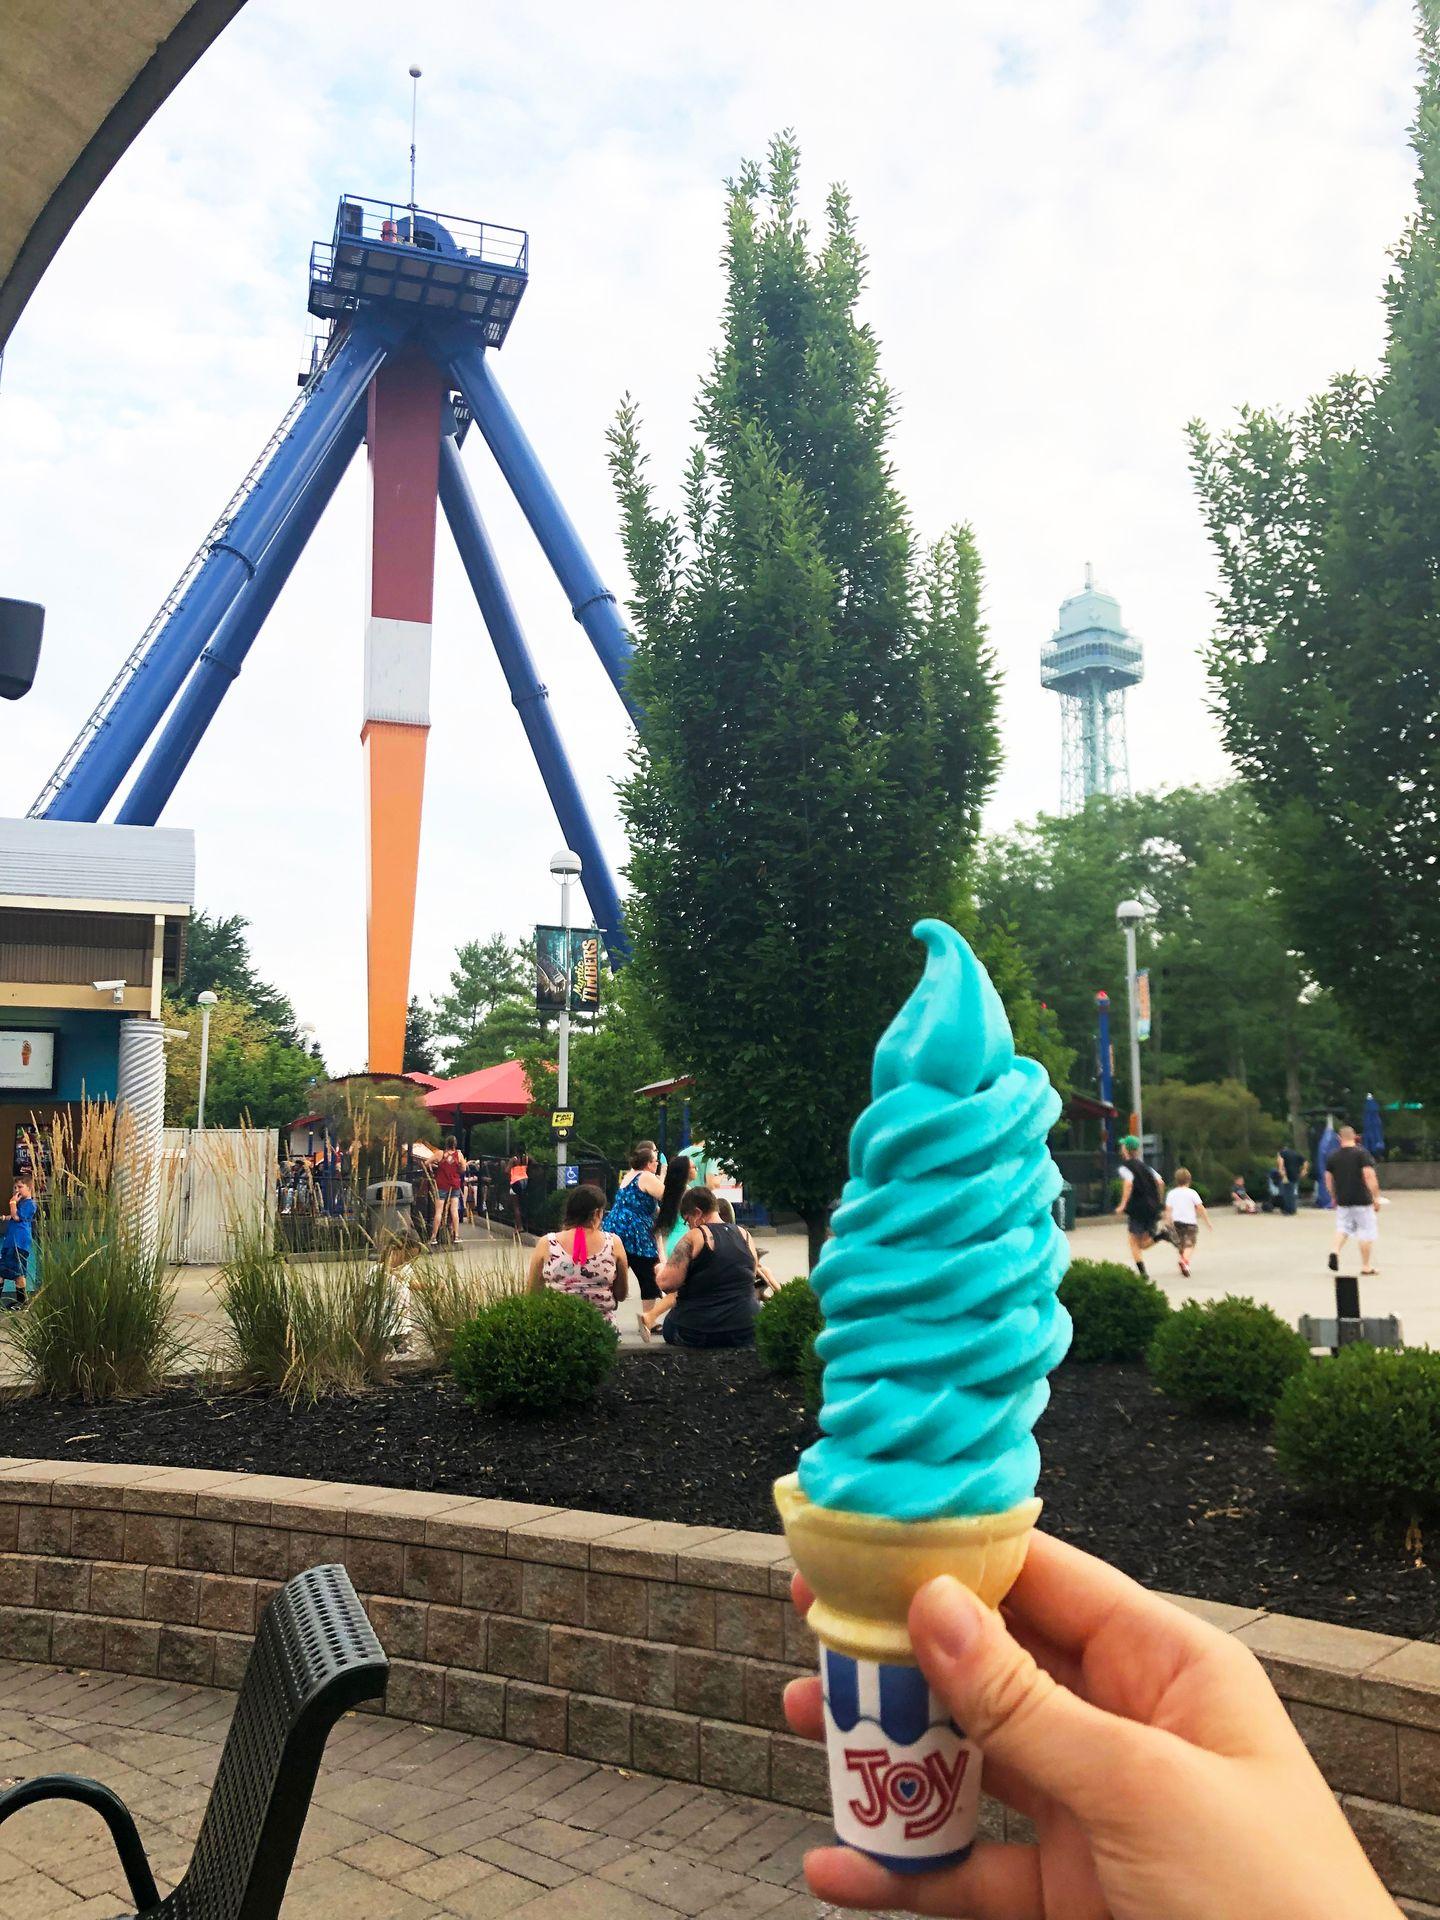 An ice cream cone with blue soft serve stacked high. There is an amusement park ride and the Kings Island Eiffel Tower in the background.